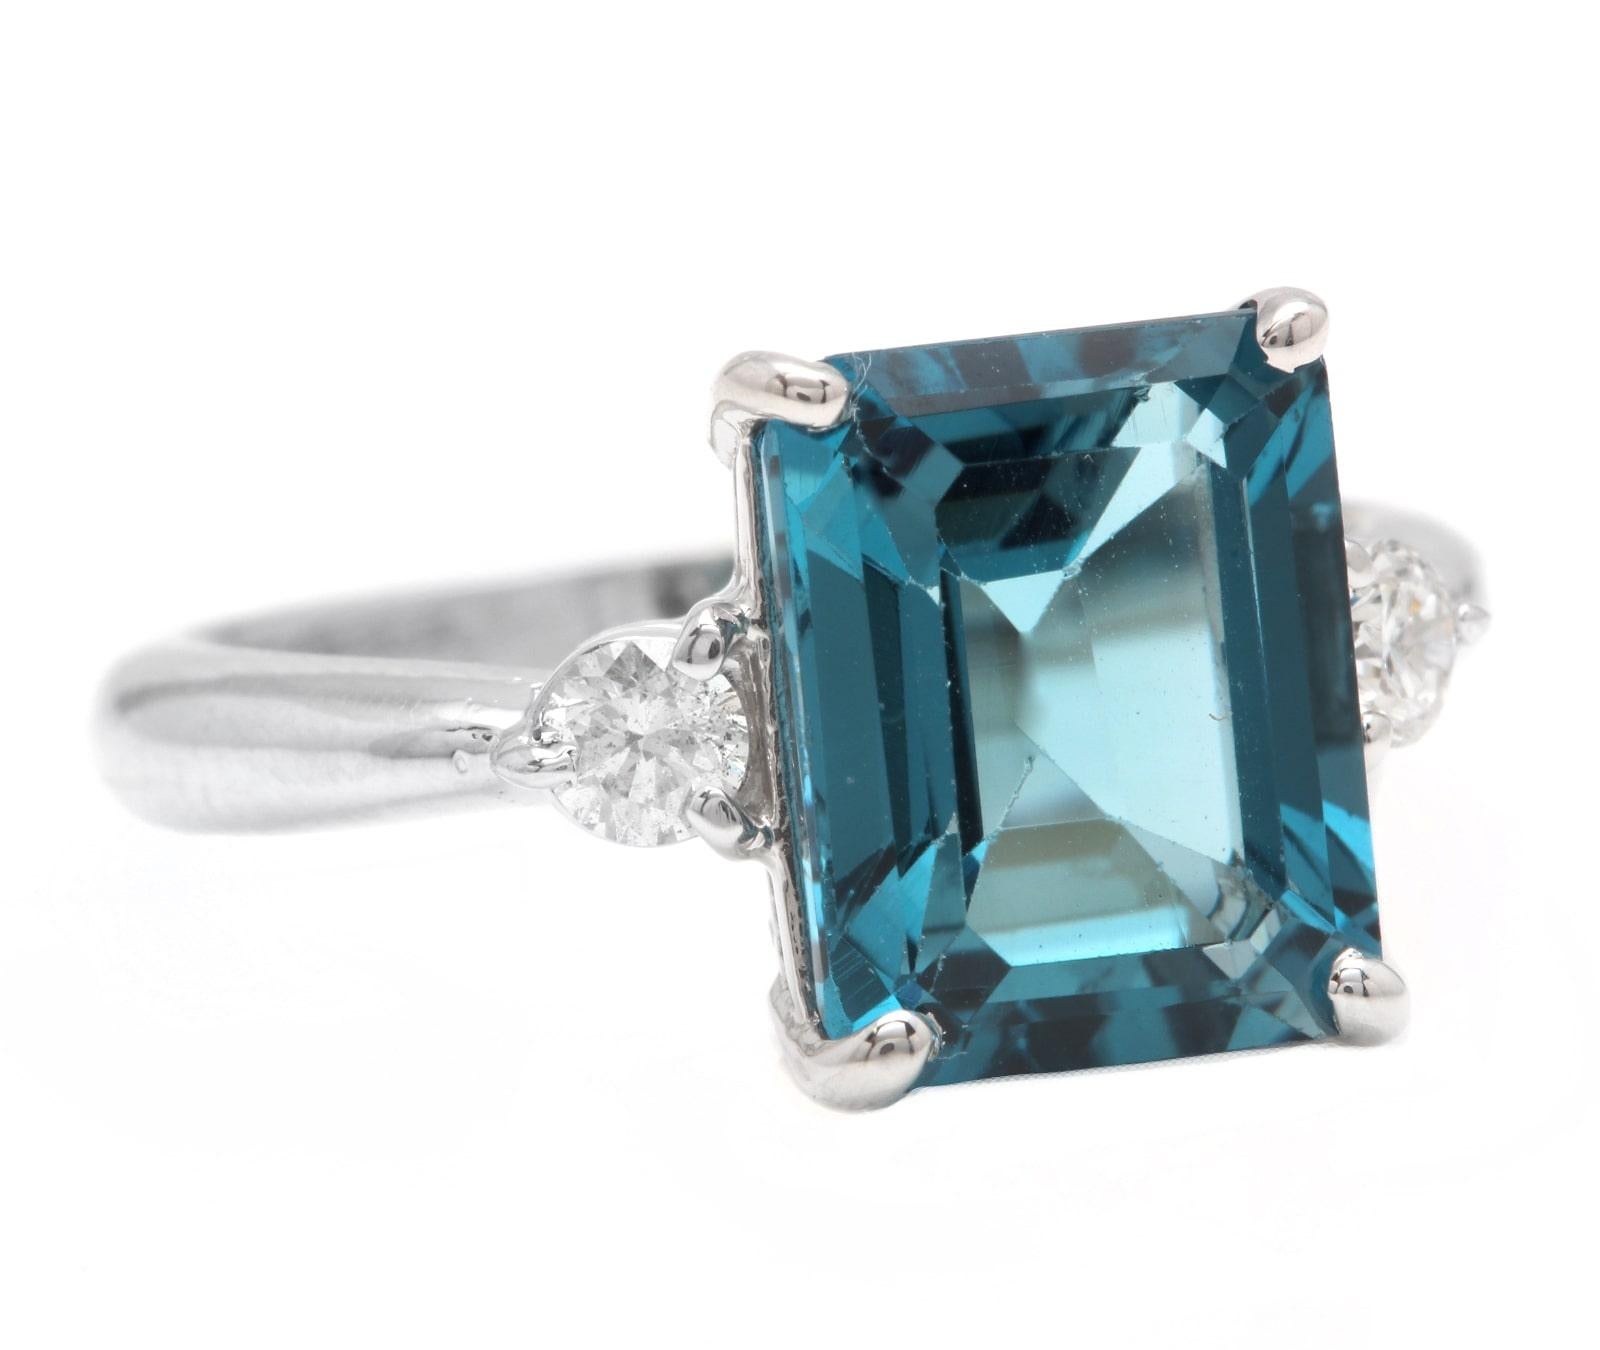 3.48 Carats Impressive Natural London Blue Topaz and Diamond 14K Solid White Gold Ring

Suggested Replacement Value: Approx. $3,000.00

Total Natural London Blue Topaz Weight is: Approx. 3.30 Carats

Topaz Measures: Approx. 10.00 x 8.00mm

Natural